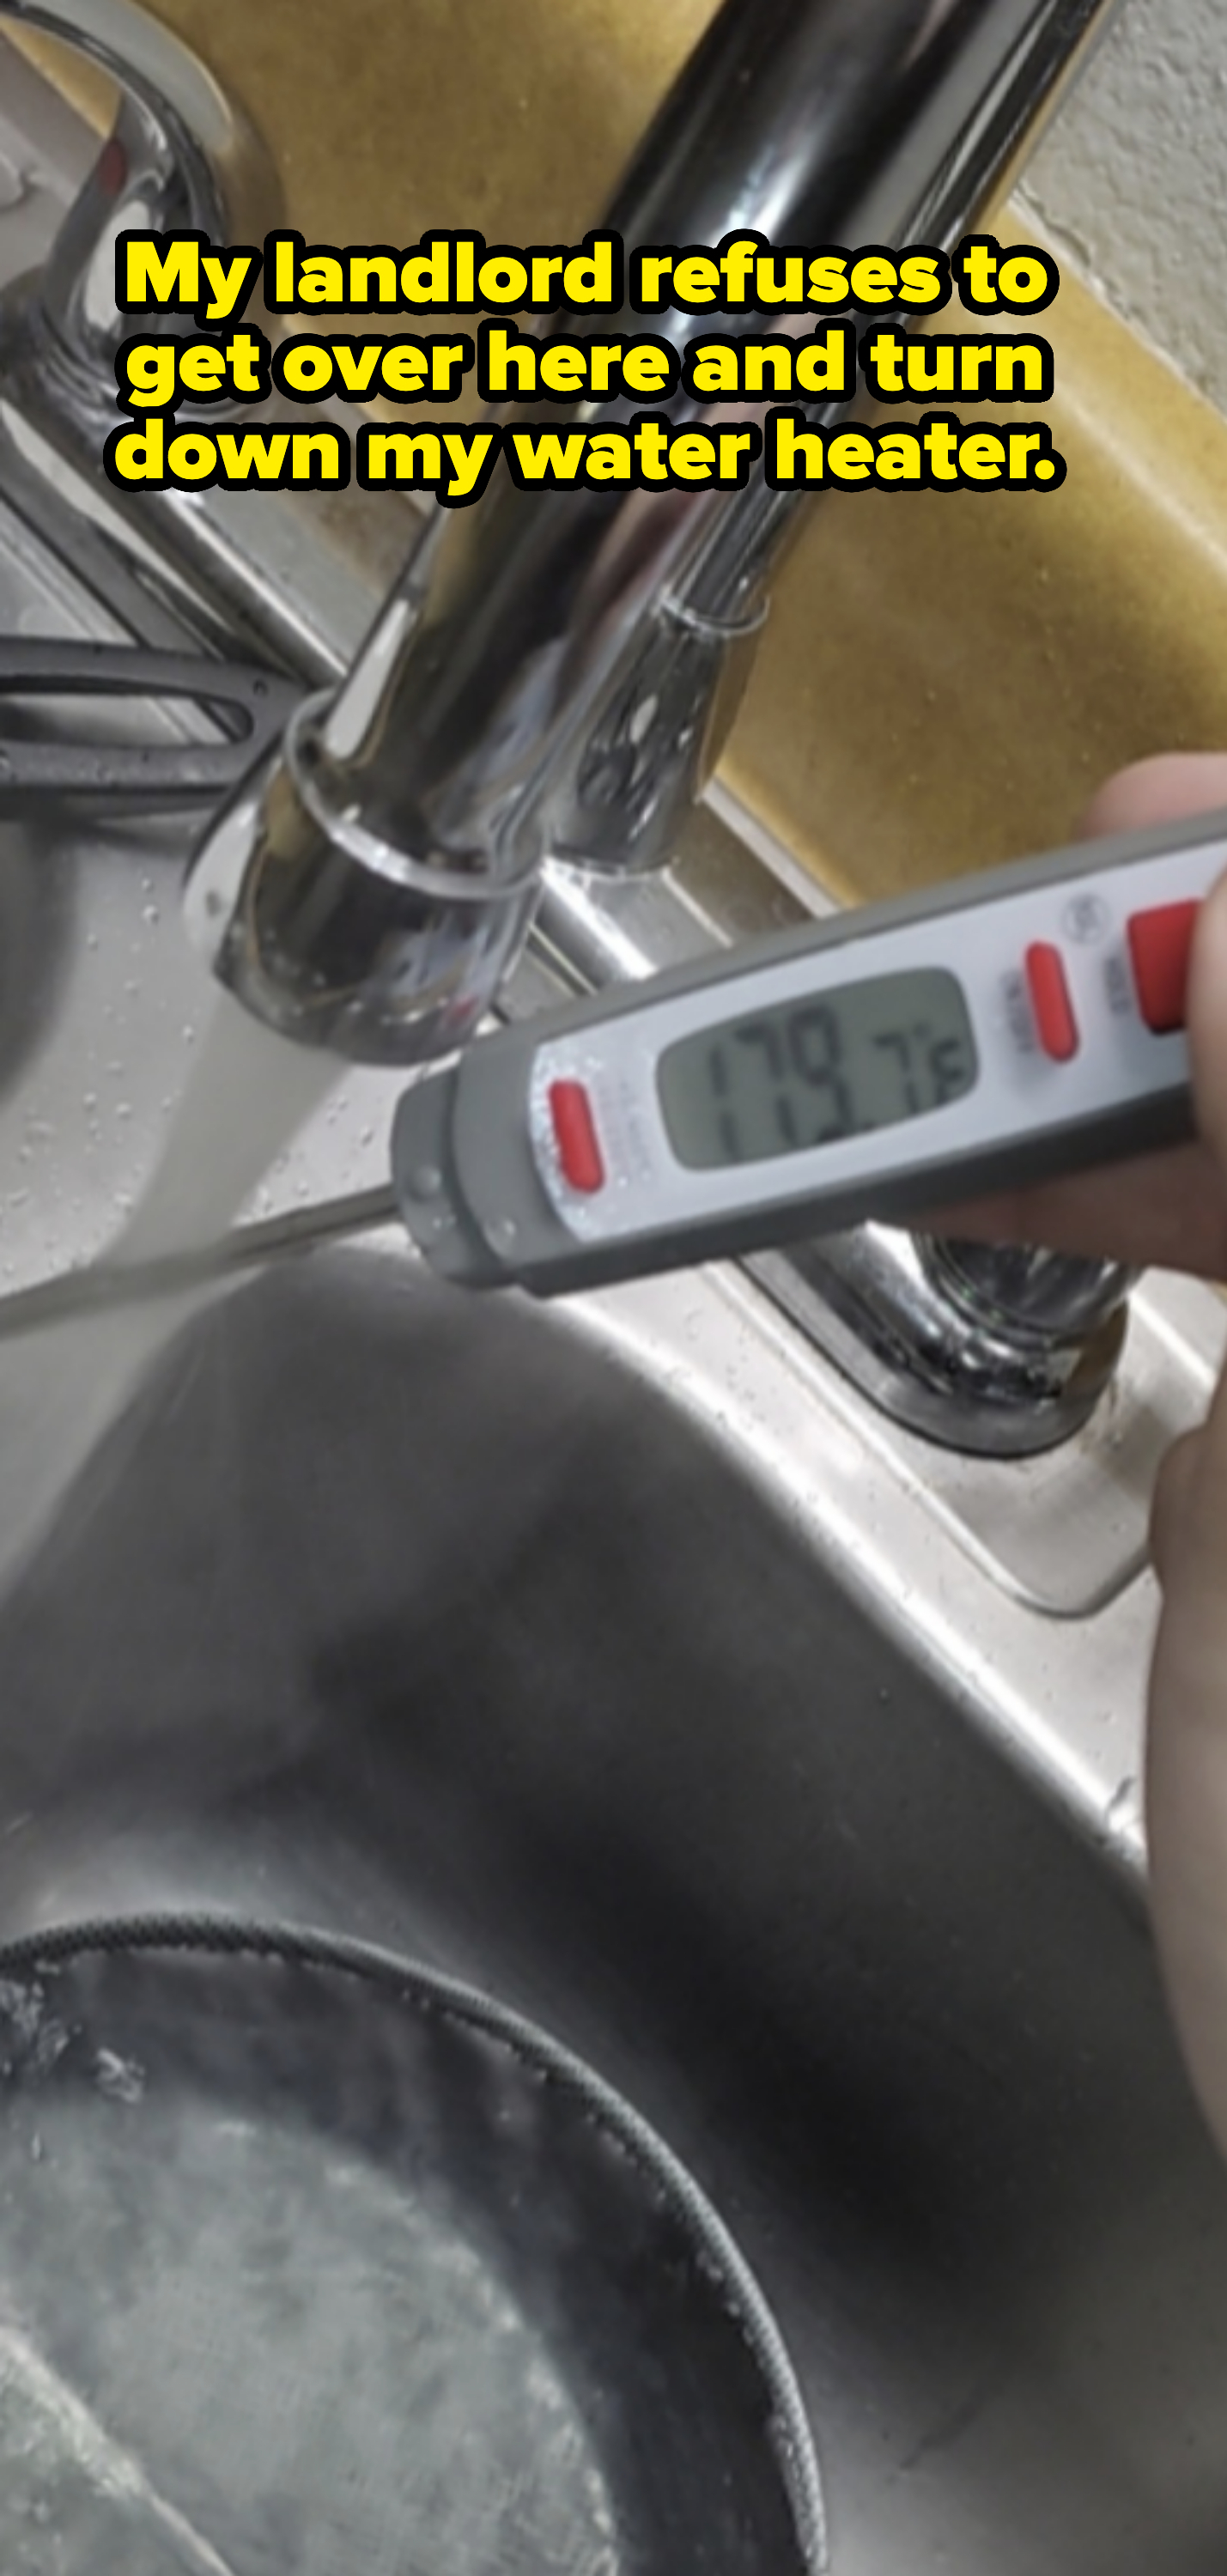 Thermometer displaying a temperature of 179°F while being held under running tap water in a sink